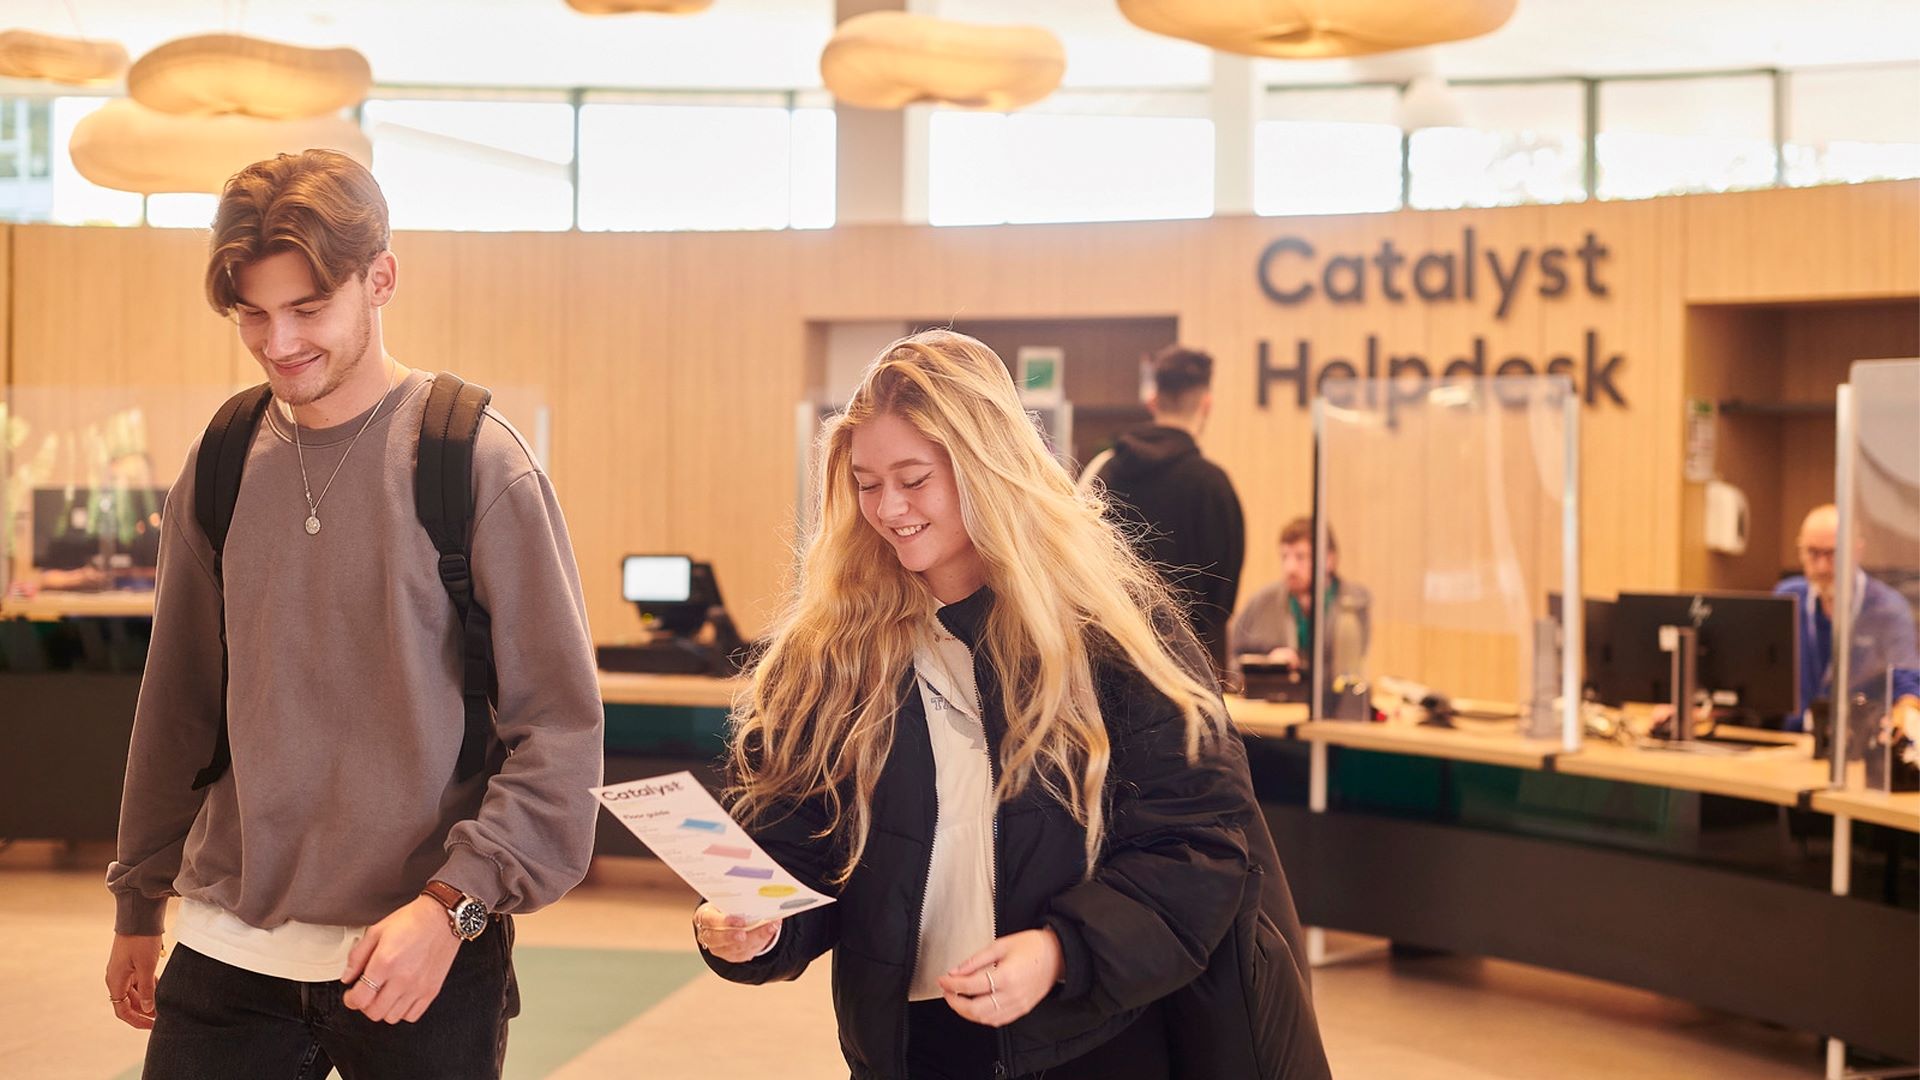 Two students walk from Catalyst helpdesk smiling and chatting.